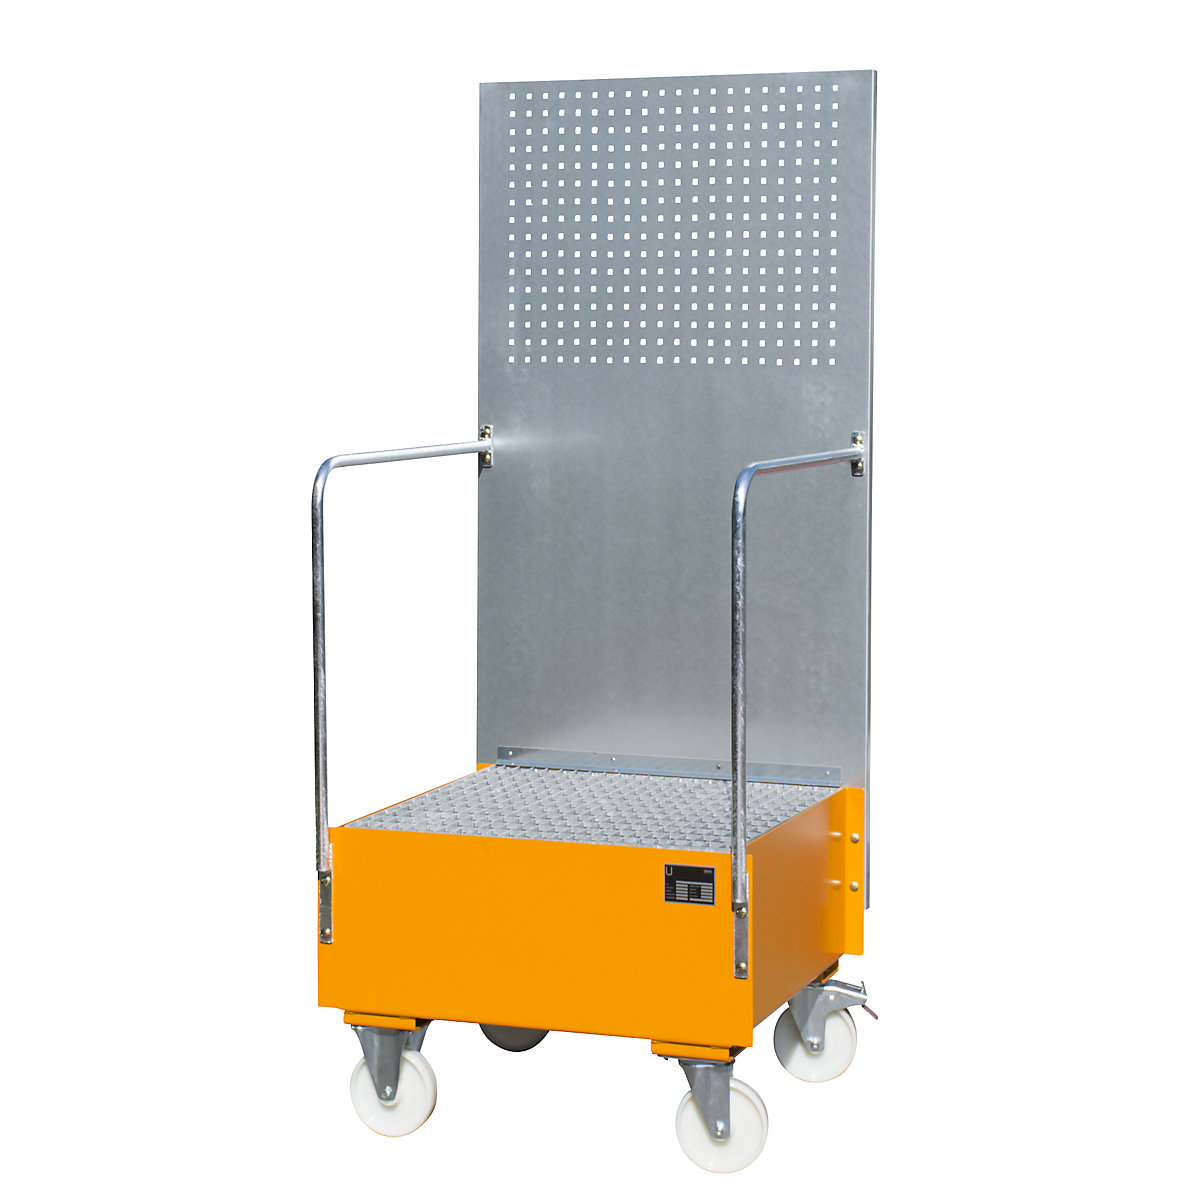 Mobile sump tray with perforated panel – eurokraft pro, 1 x 200 l drum placed upright, LxWxH 870 x 890 x 2110 mm, yellow orange-4